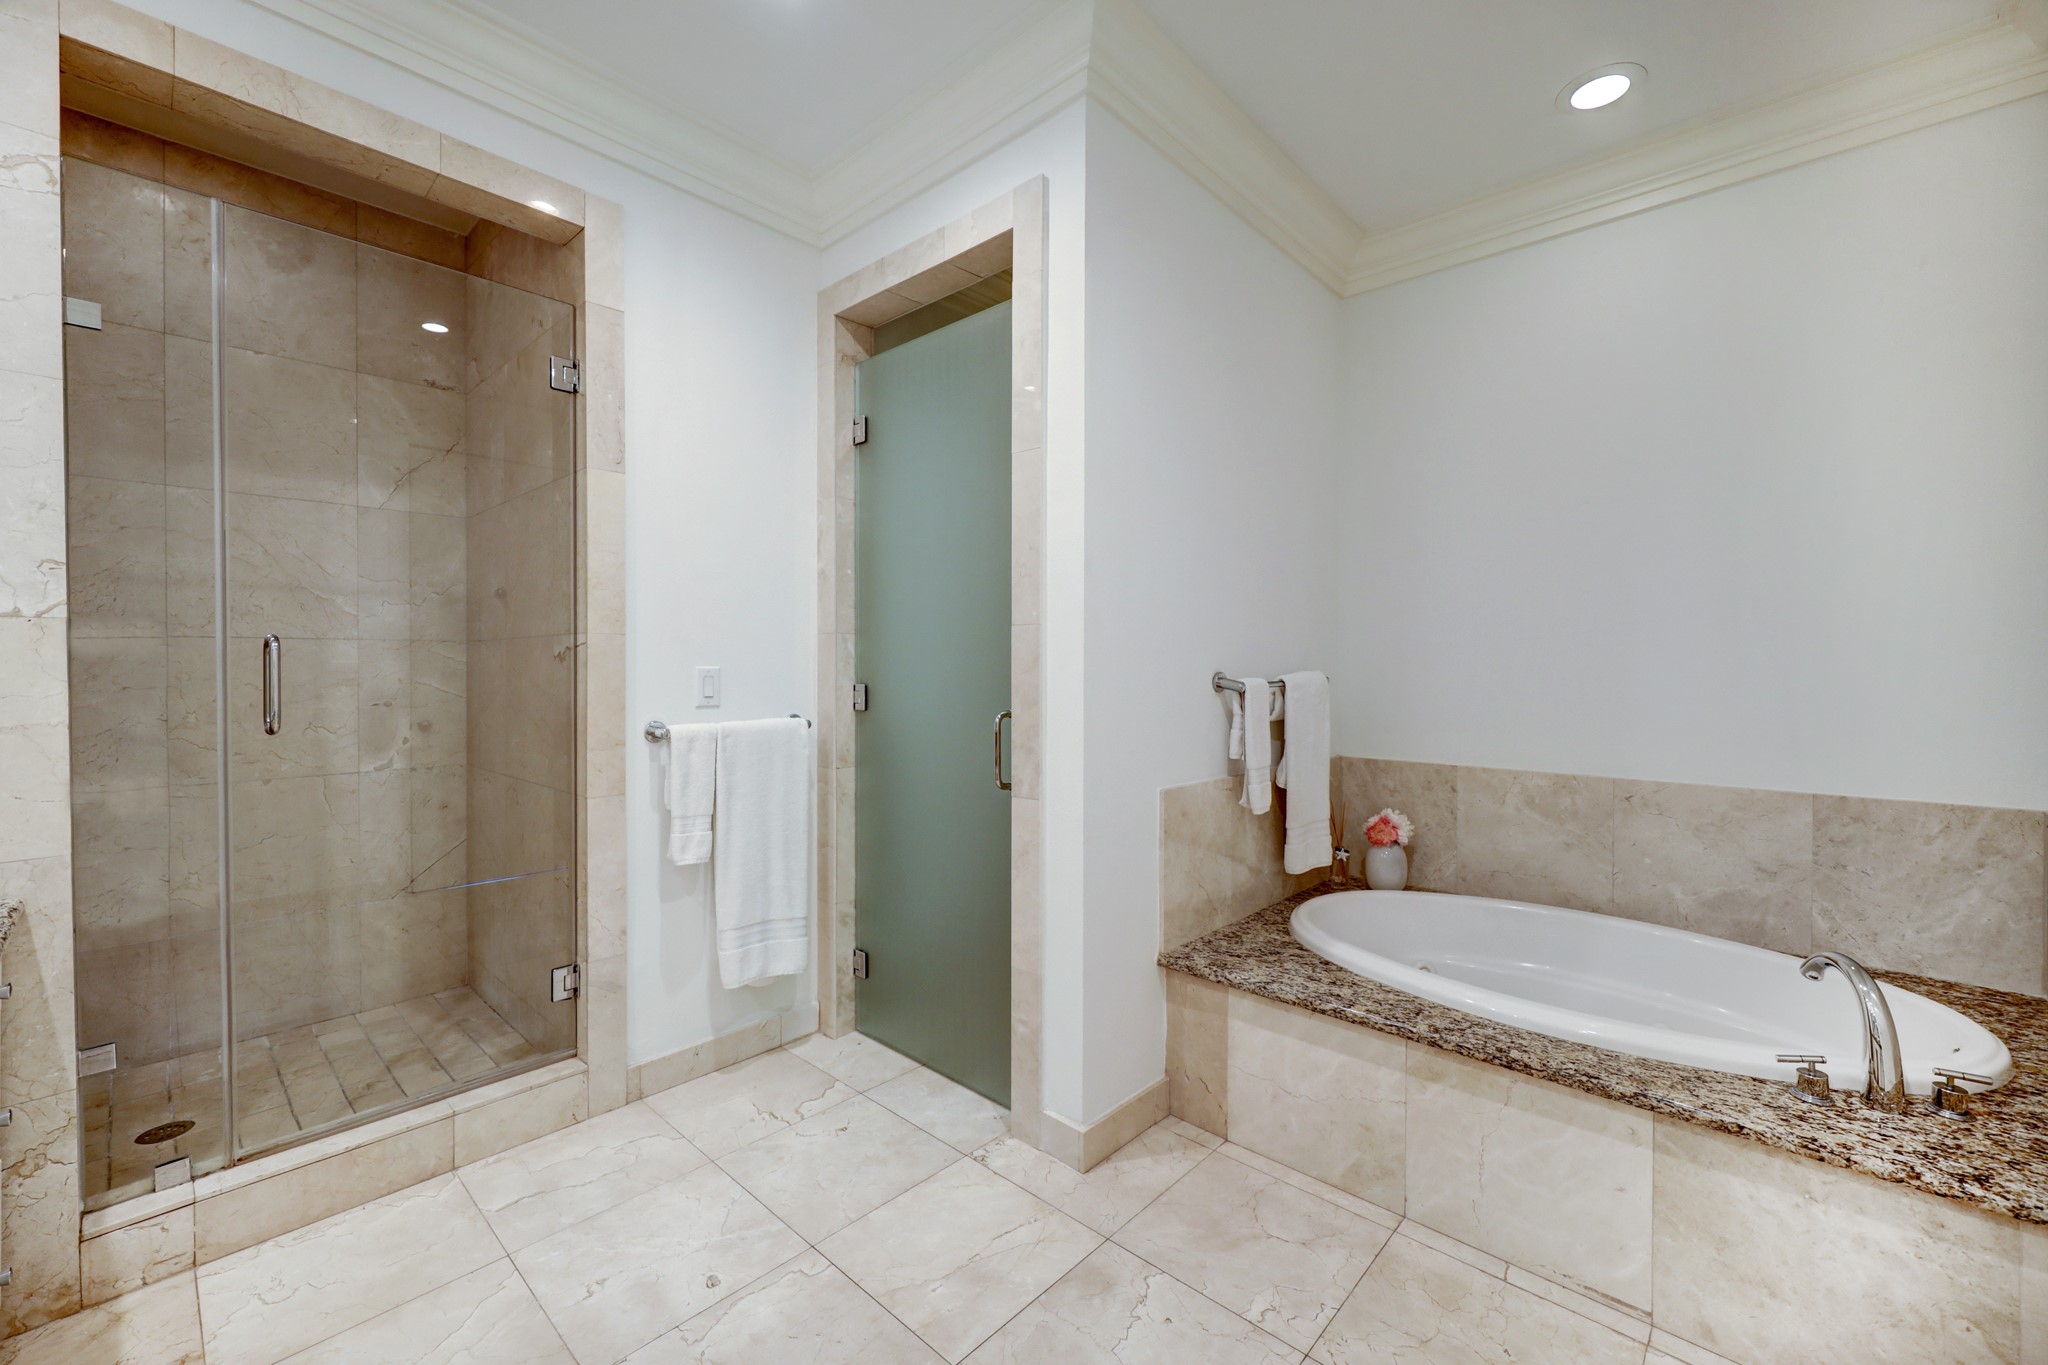 Another view of the primary bath with walk-in shower, separate commode room, and soaking tub.